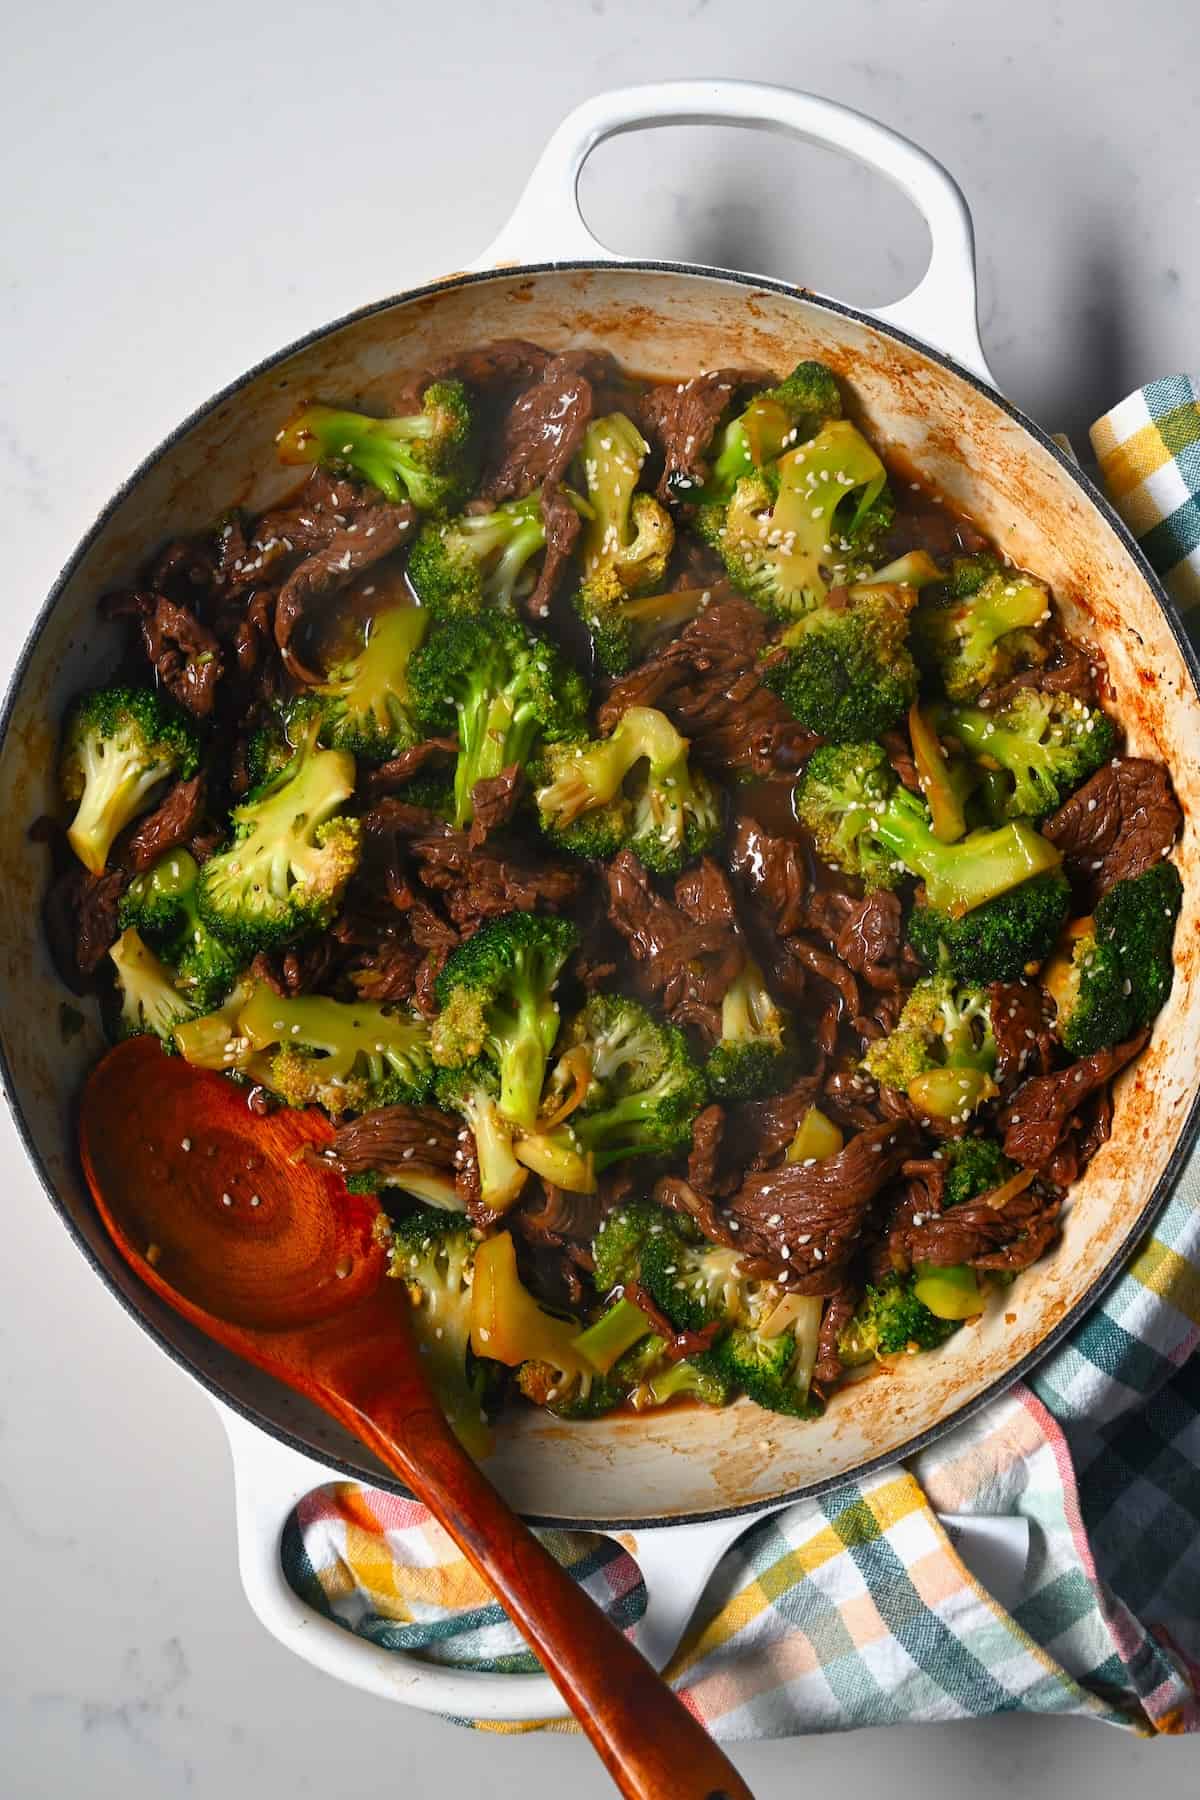 Beef and broccoli stir fry in a skillet